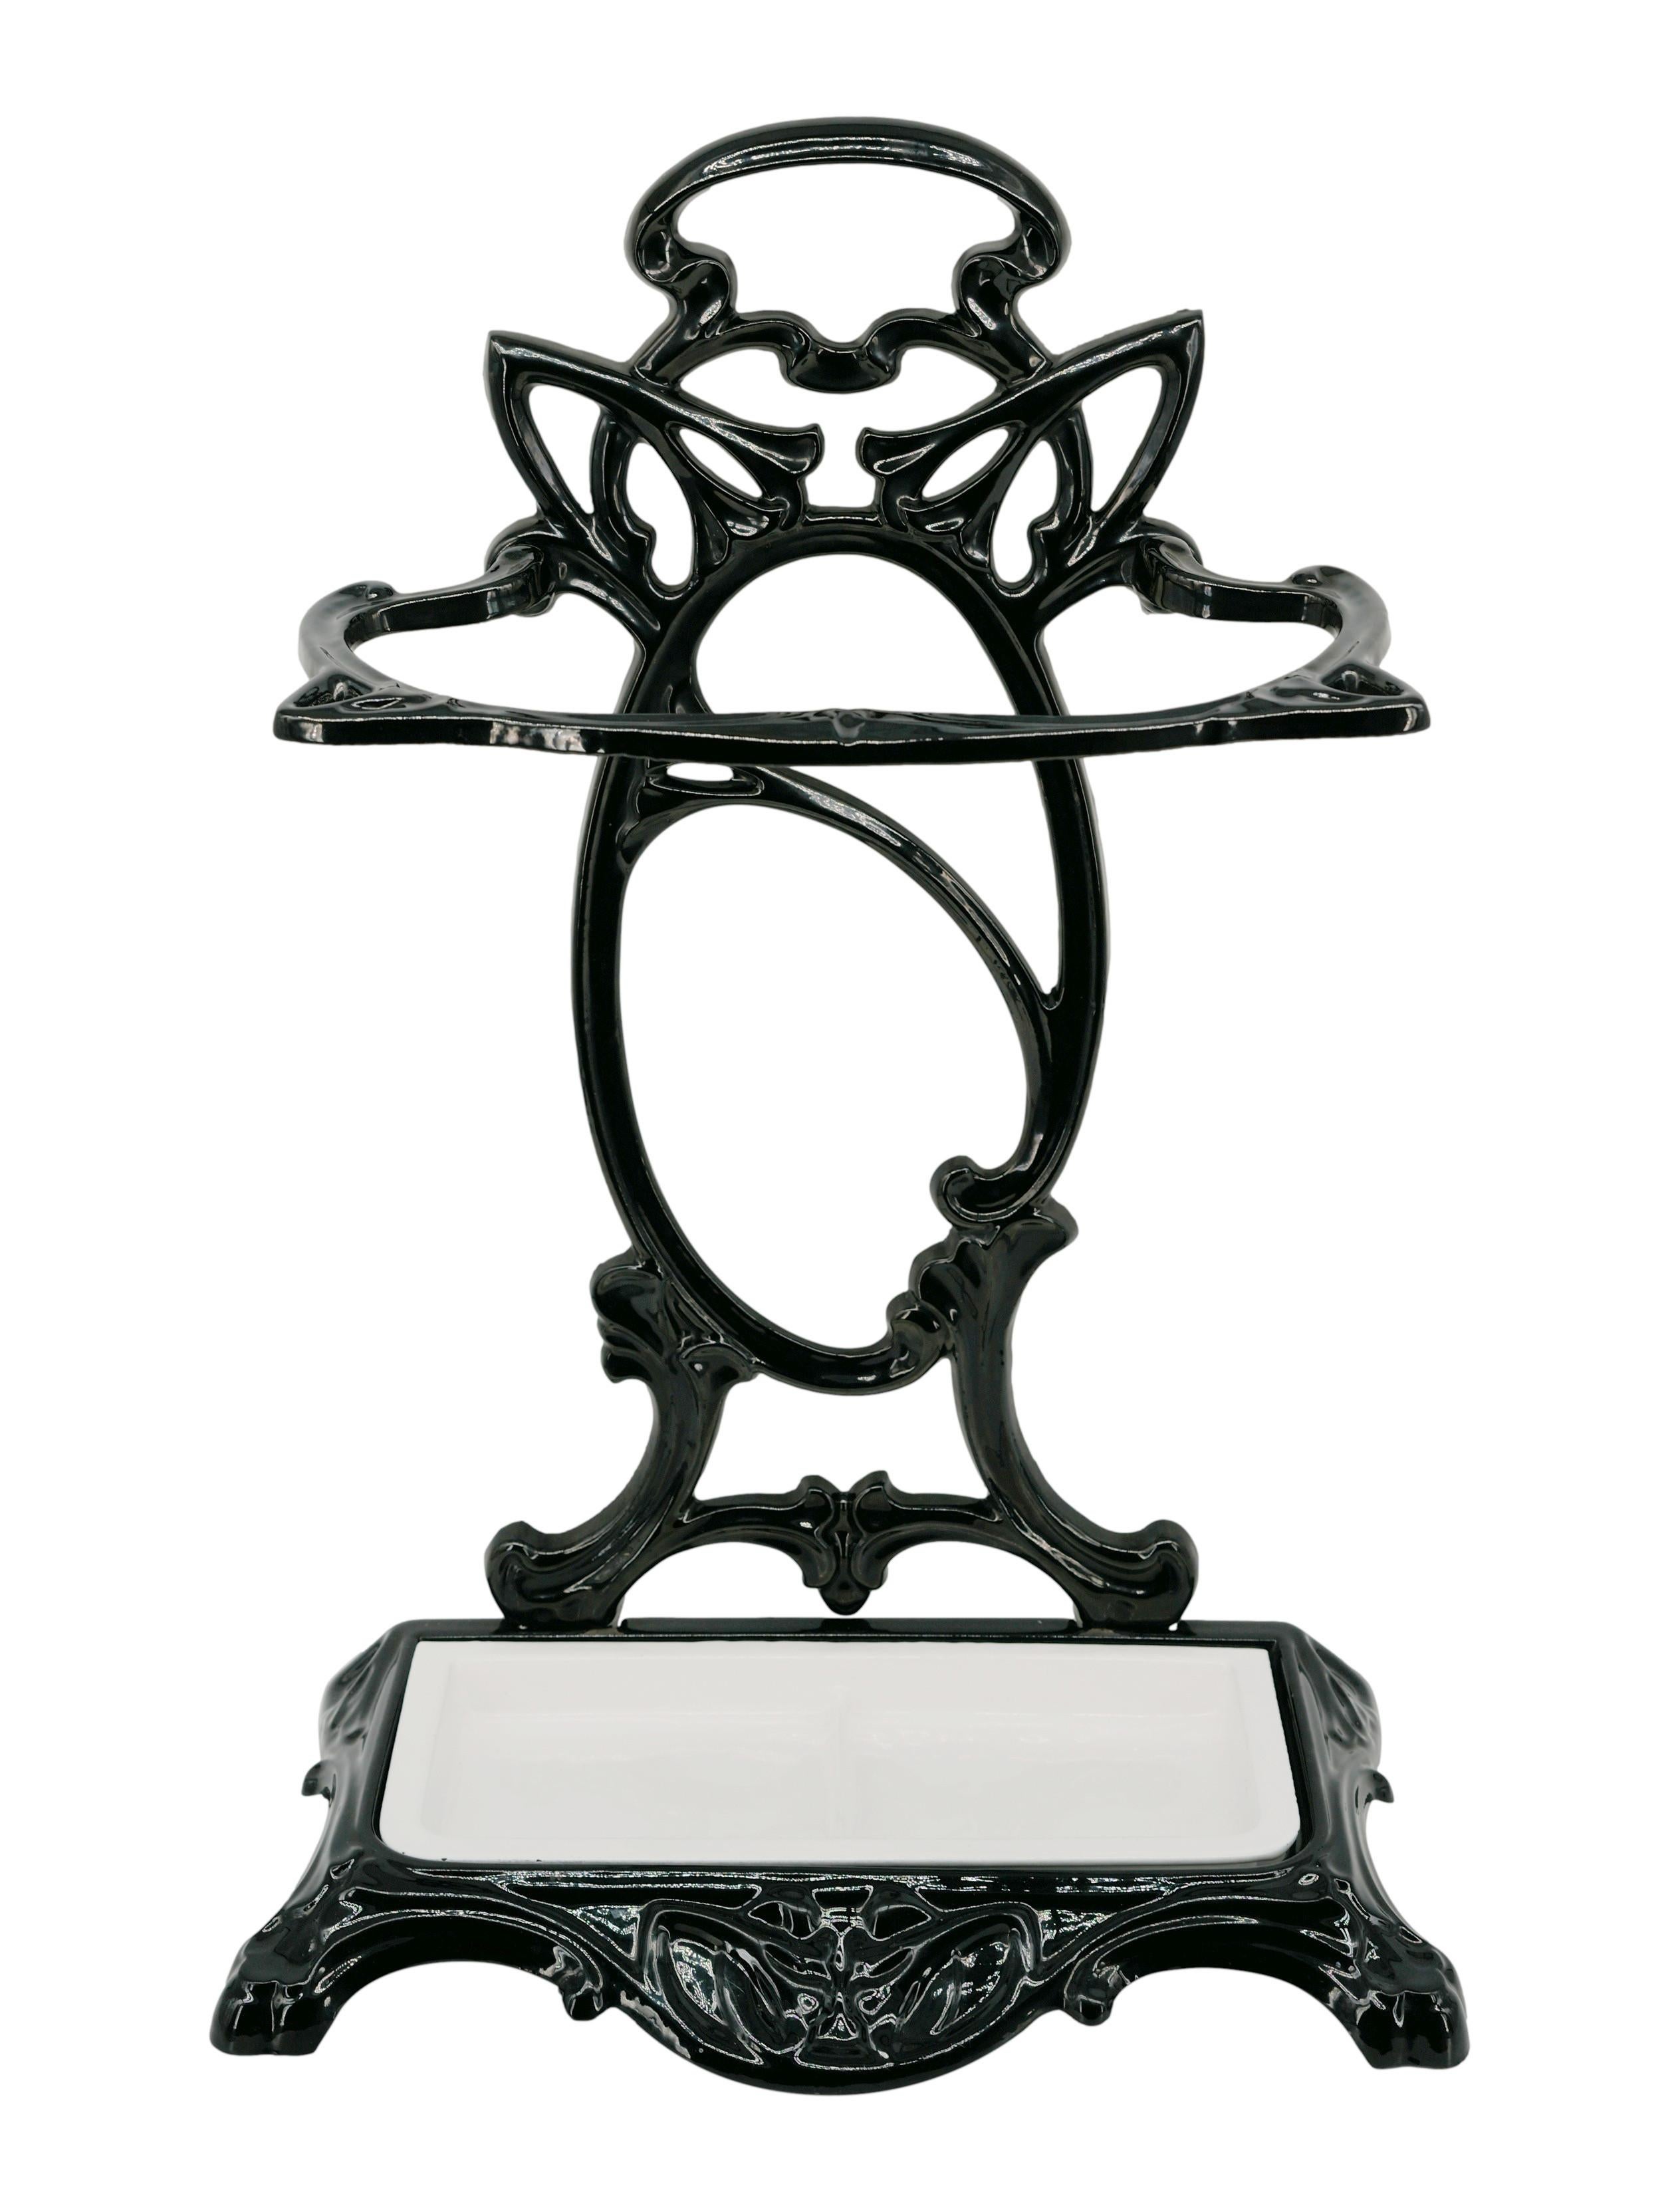 French Art Nouveau umbrella stand, France, ca.1900. Black and white enameled cast iron (fixture and tank). Height: 23.6